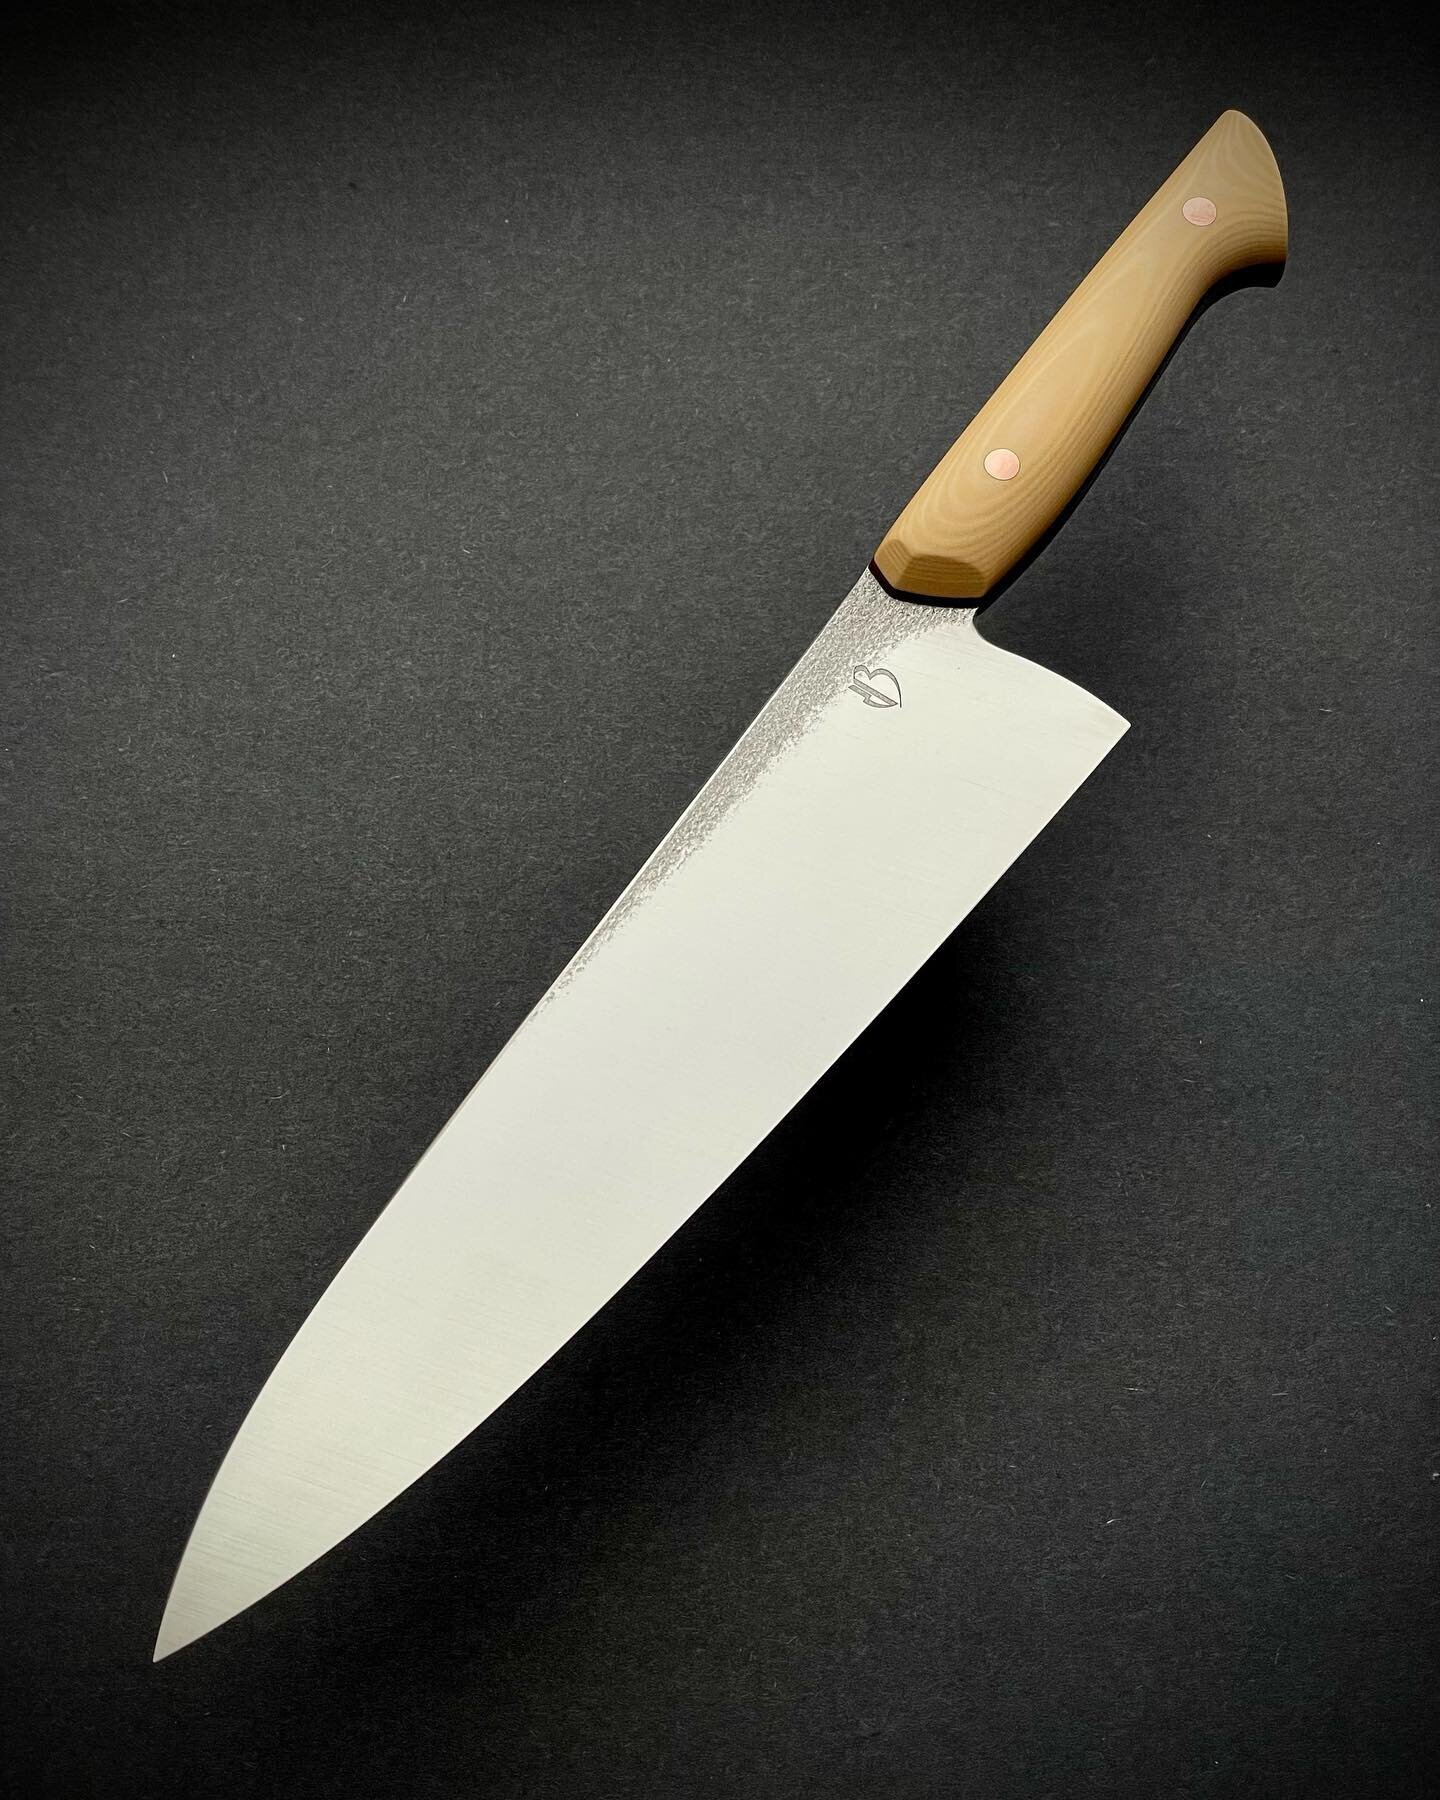 230mm gyuto in CPM-Magnacut, handle is ivory paper micarta with maroon G10 liners and copper hardware. (Spoken for)
&bull;
#classickitchen #kitchentools #cutlery #customkitchenknives #magnacut #profesionalchefs #homecooking